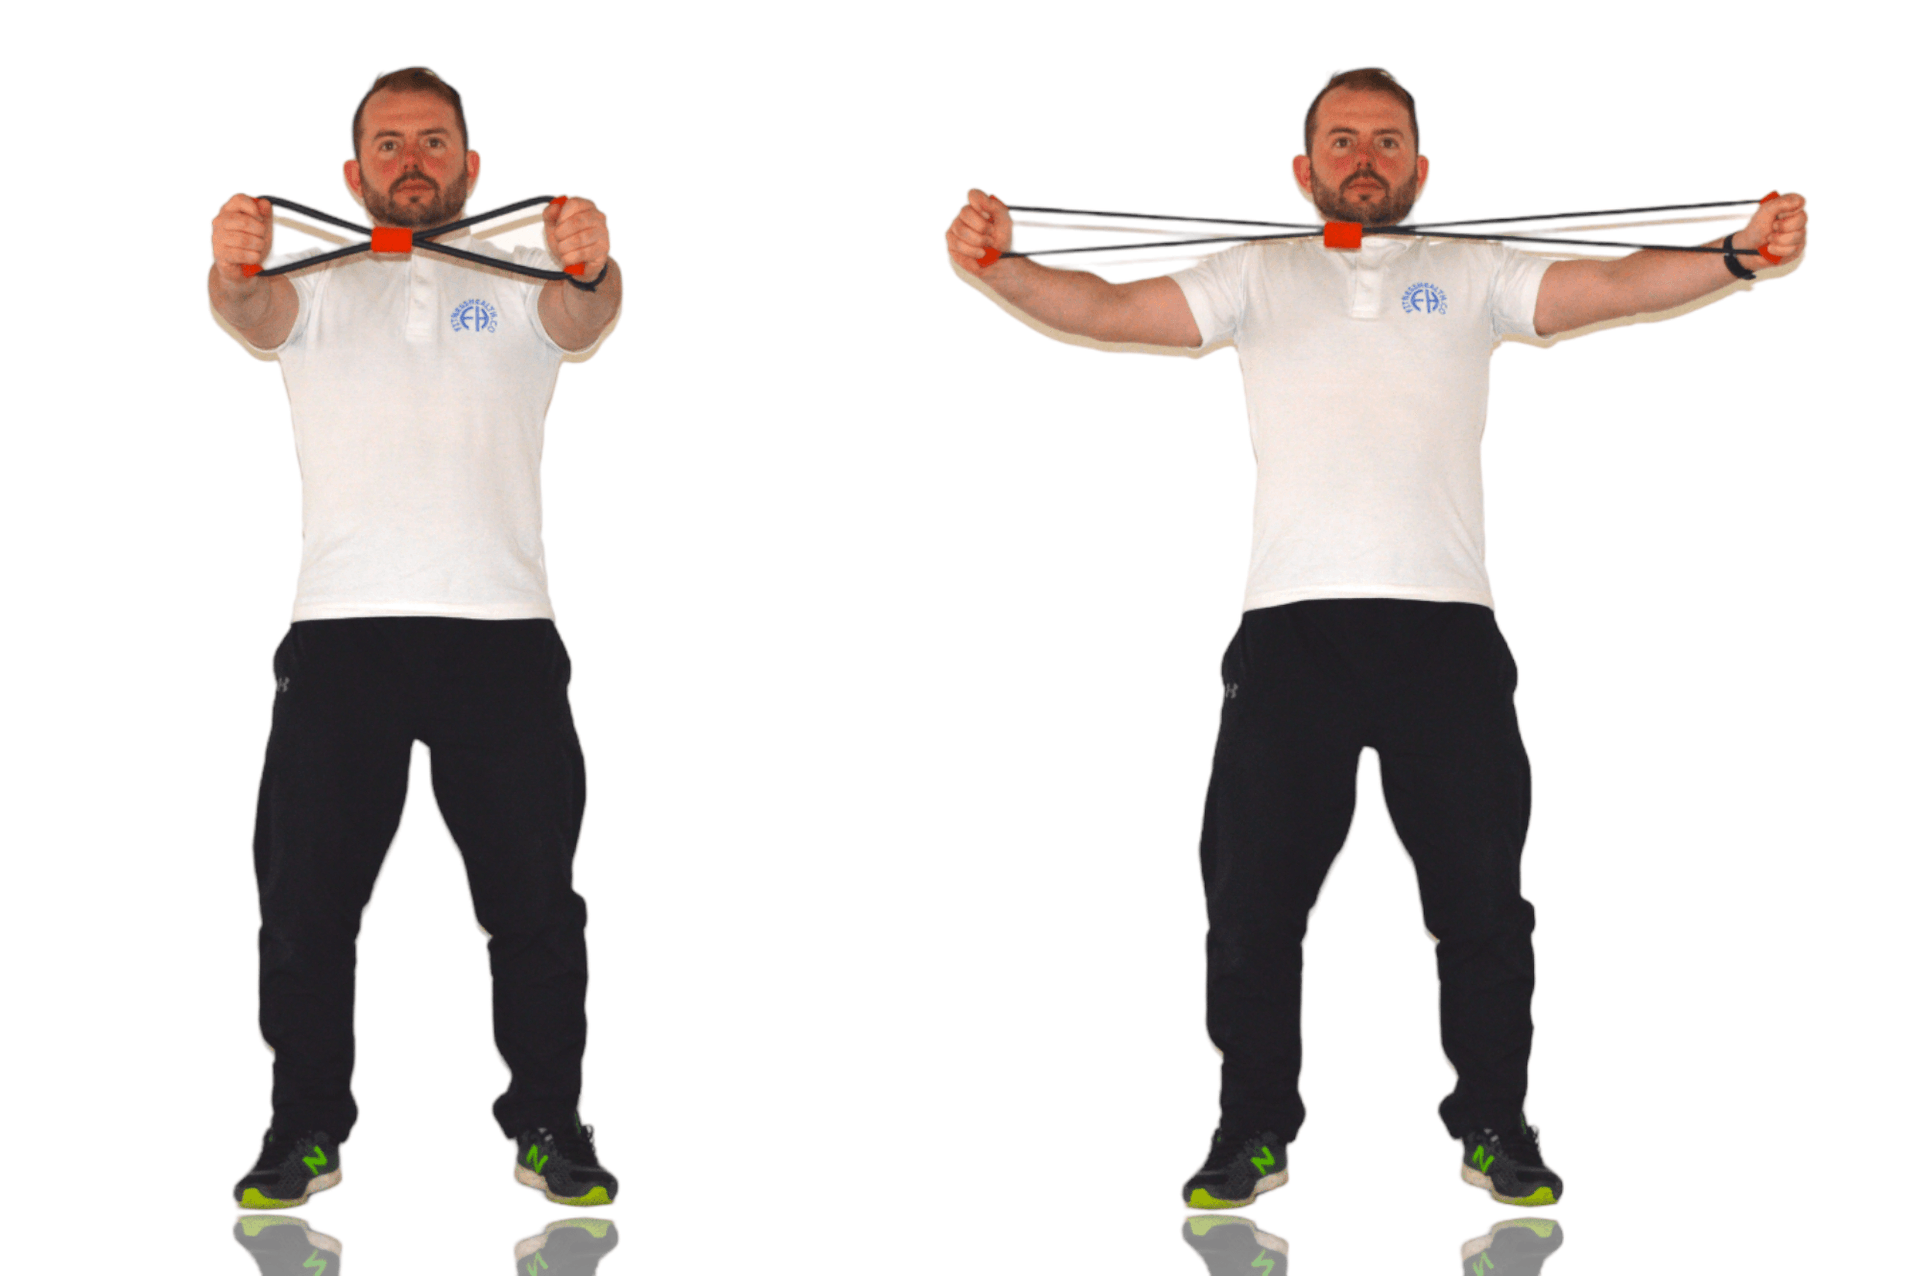 Exercises you can do with a figure 8 resistance band – Fitness Health